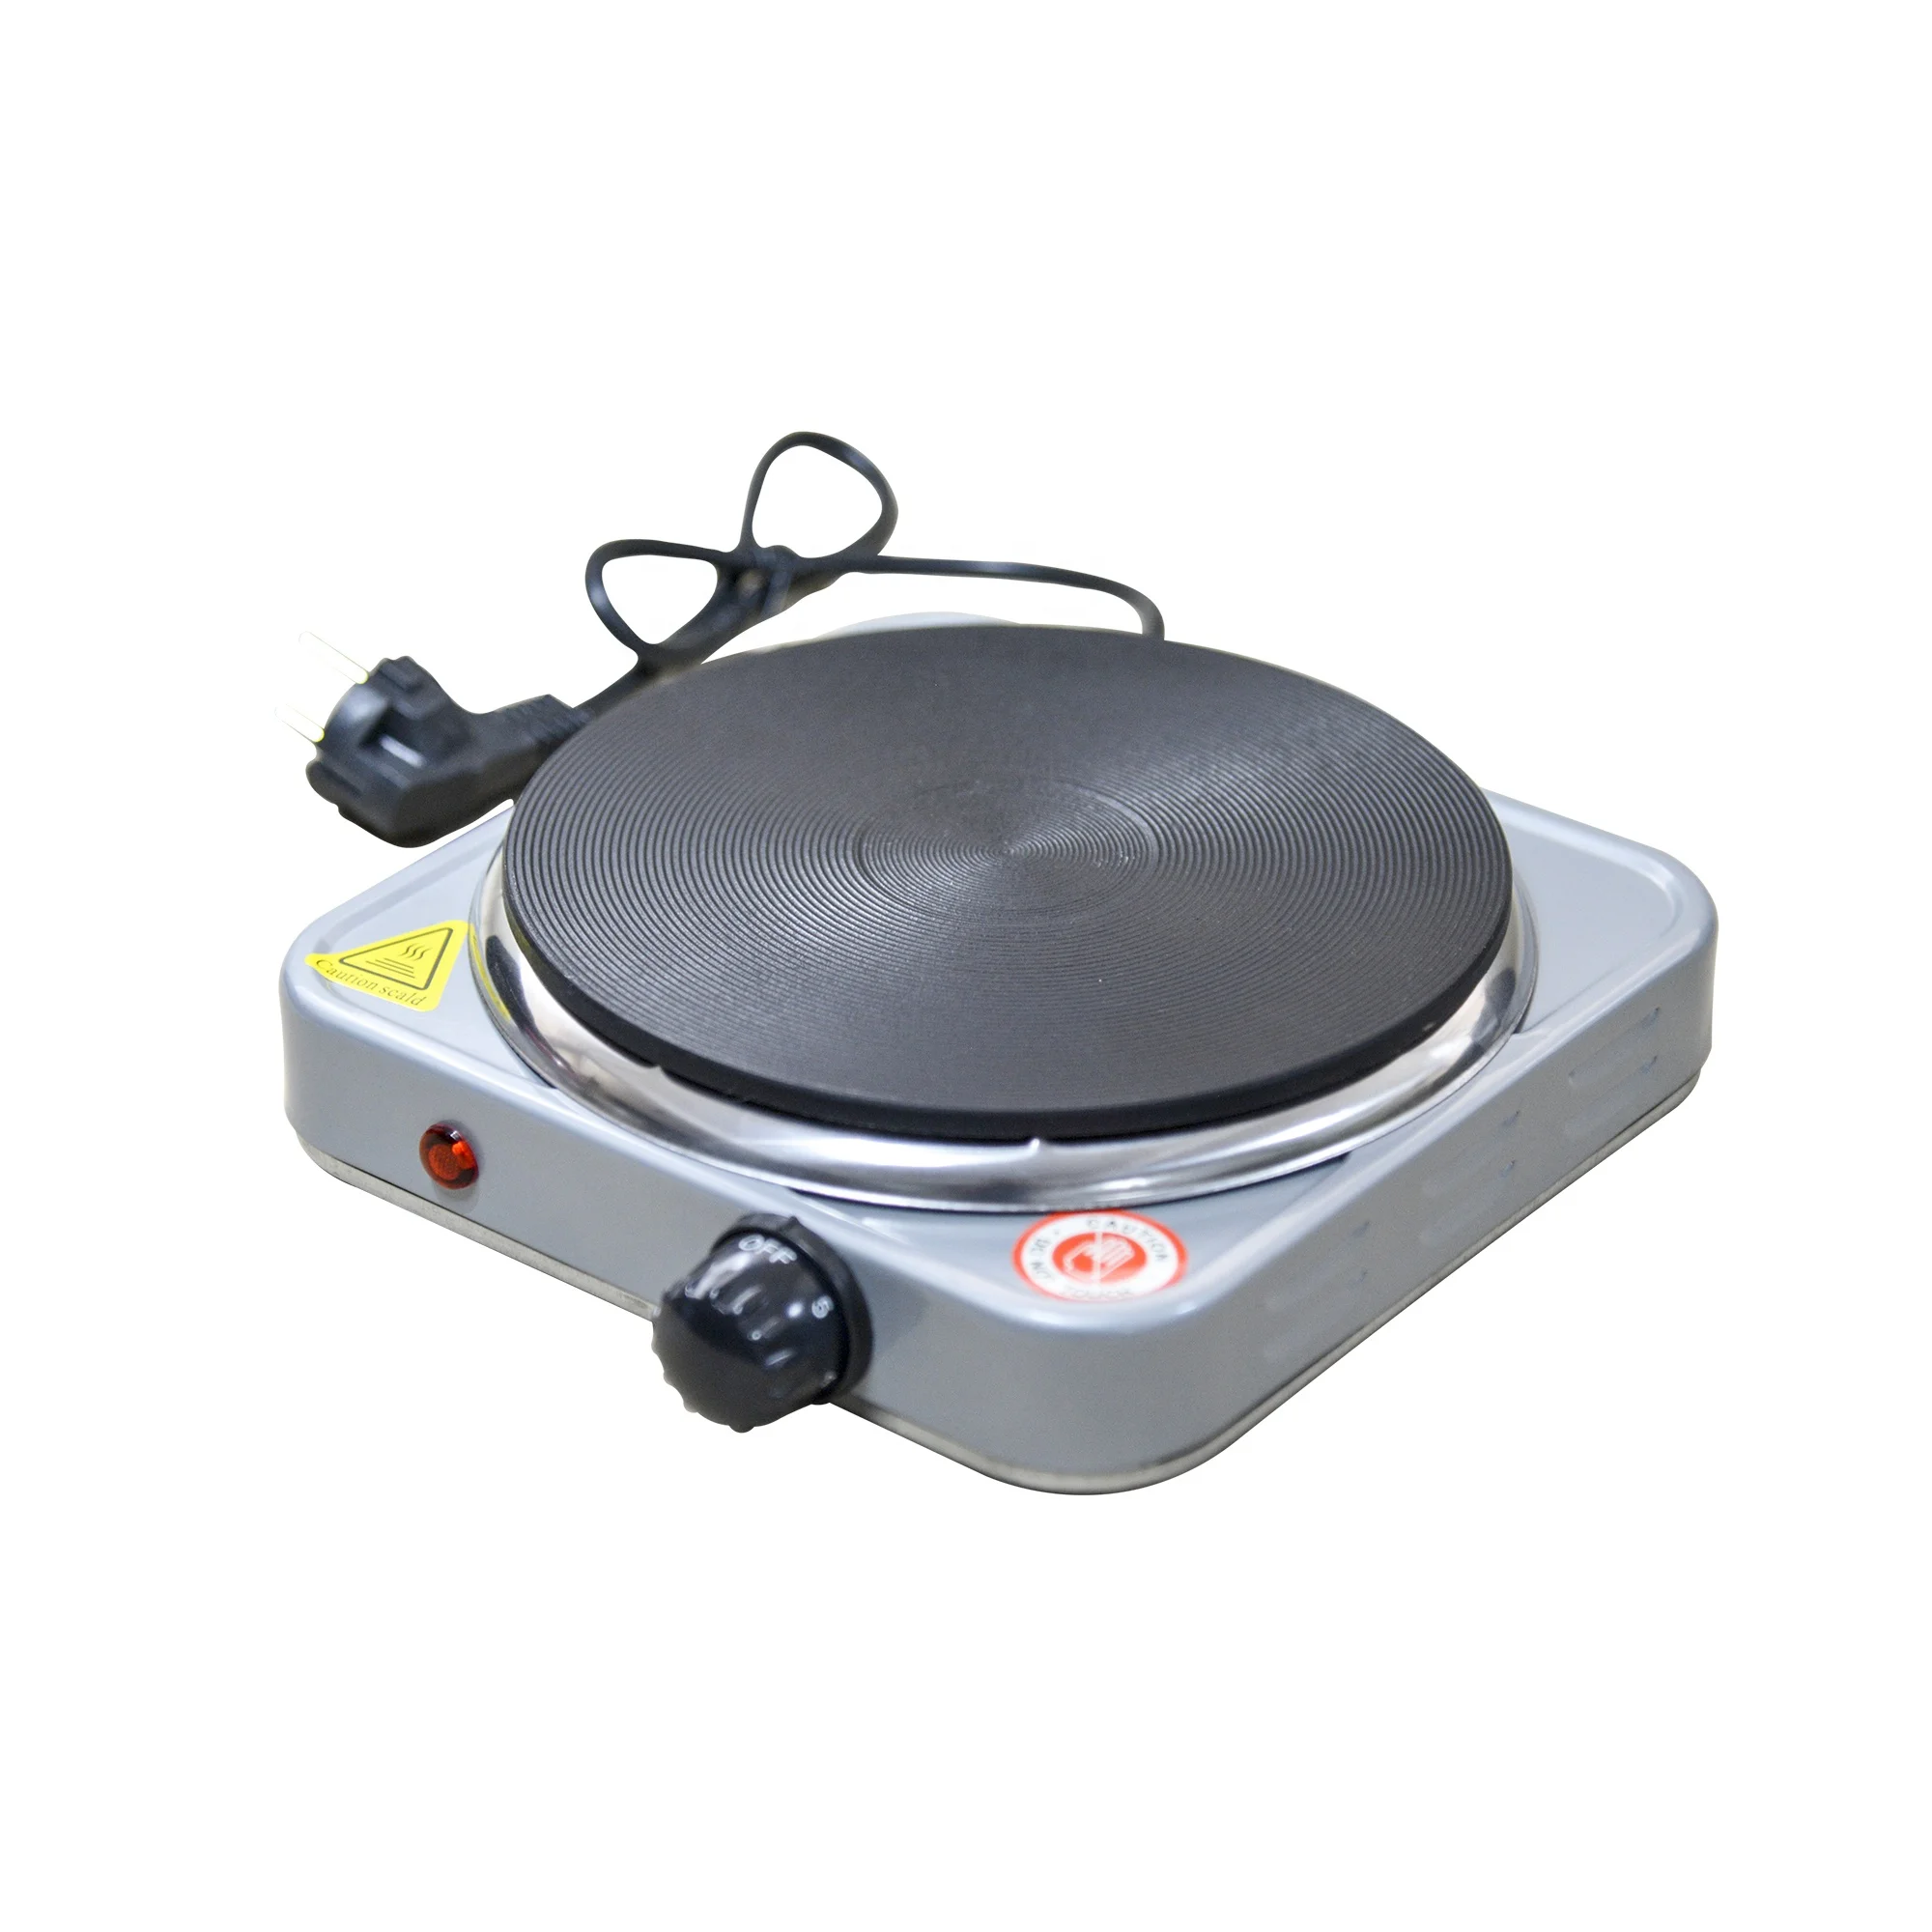 Camping Home 1500w Electric Portable Stainless Steel Hotplate Cooking Hob Stove 